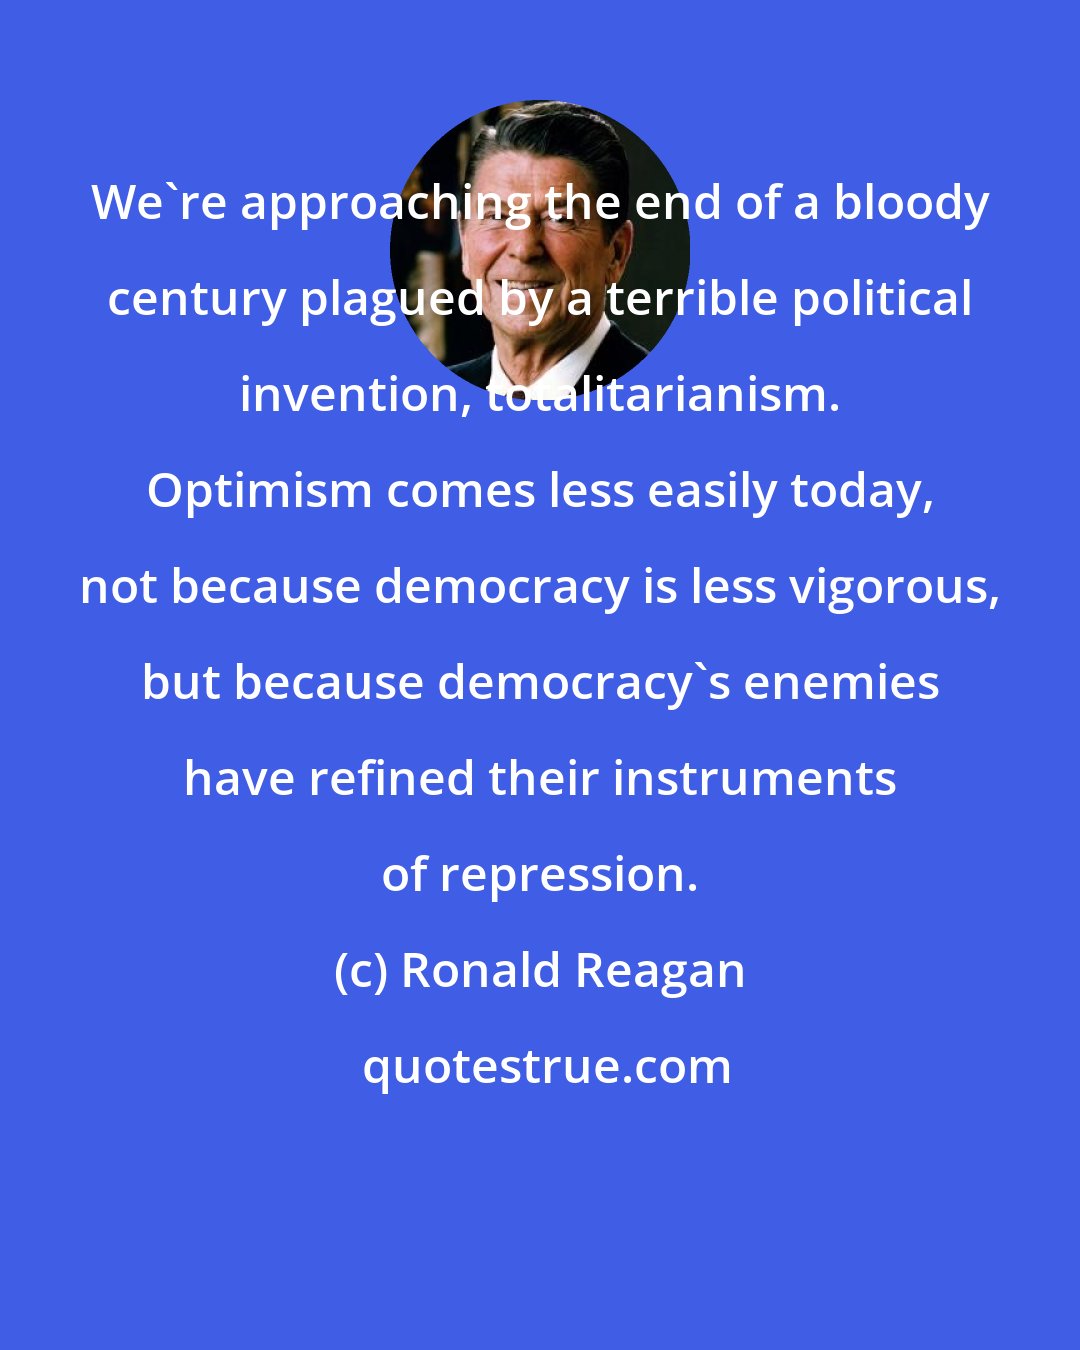 Ronald Reagan: We're approaching the end of a bloody century plagued by a terrible political invention, totalitarianism. Optimism comes less easily today, not because democracy is less vigorous, but because democracy's enemies have refined their instruments of repression.